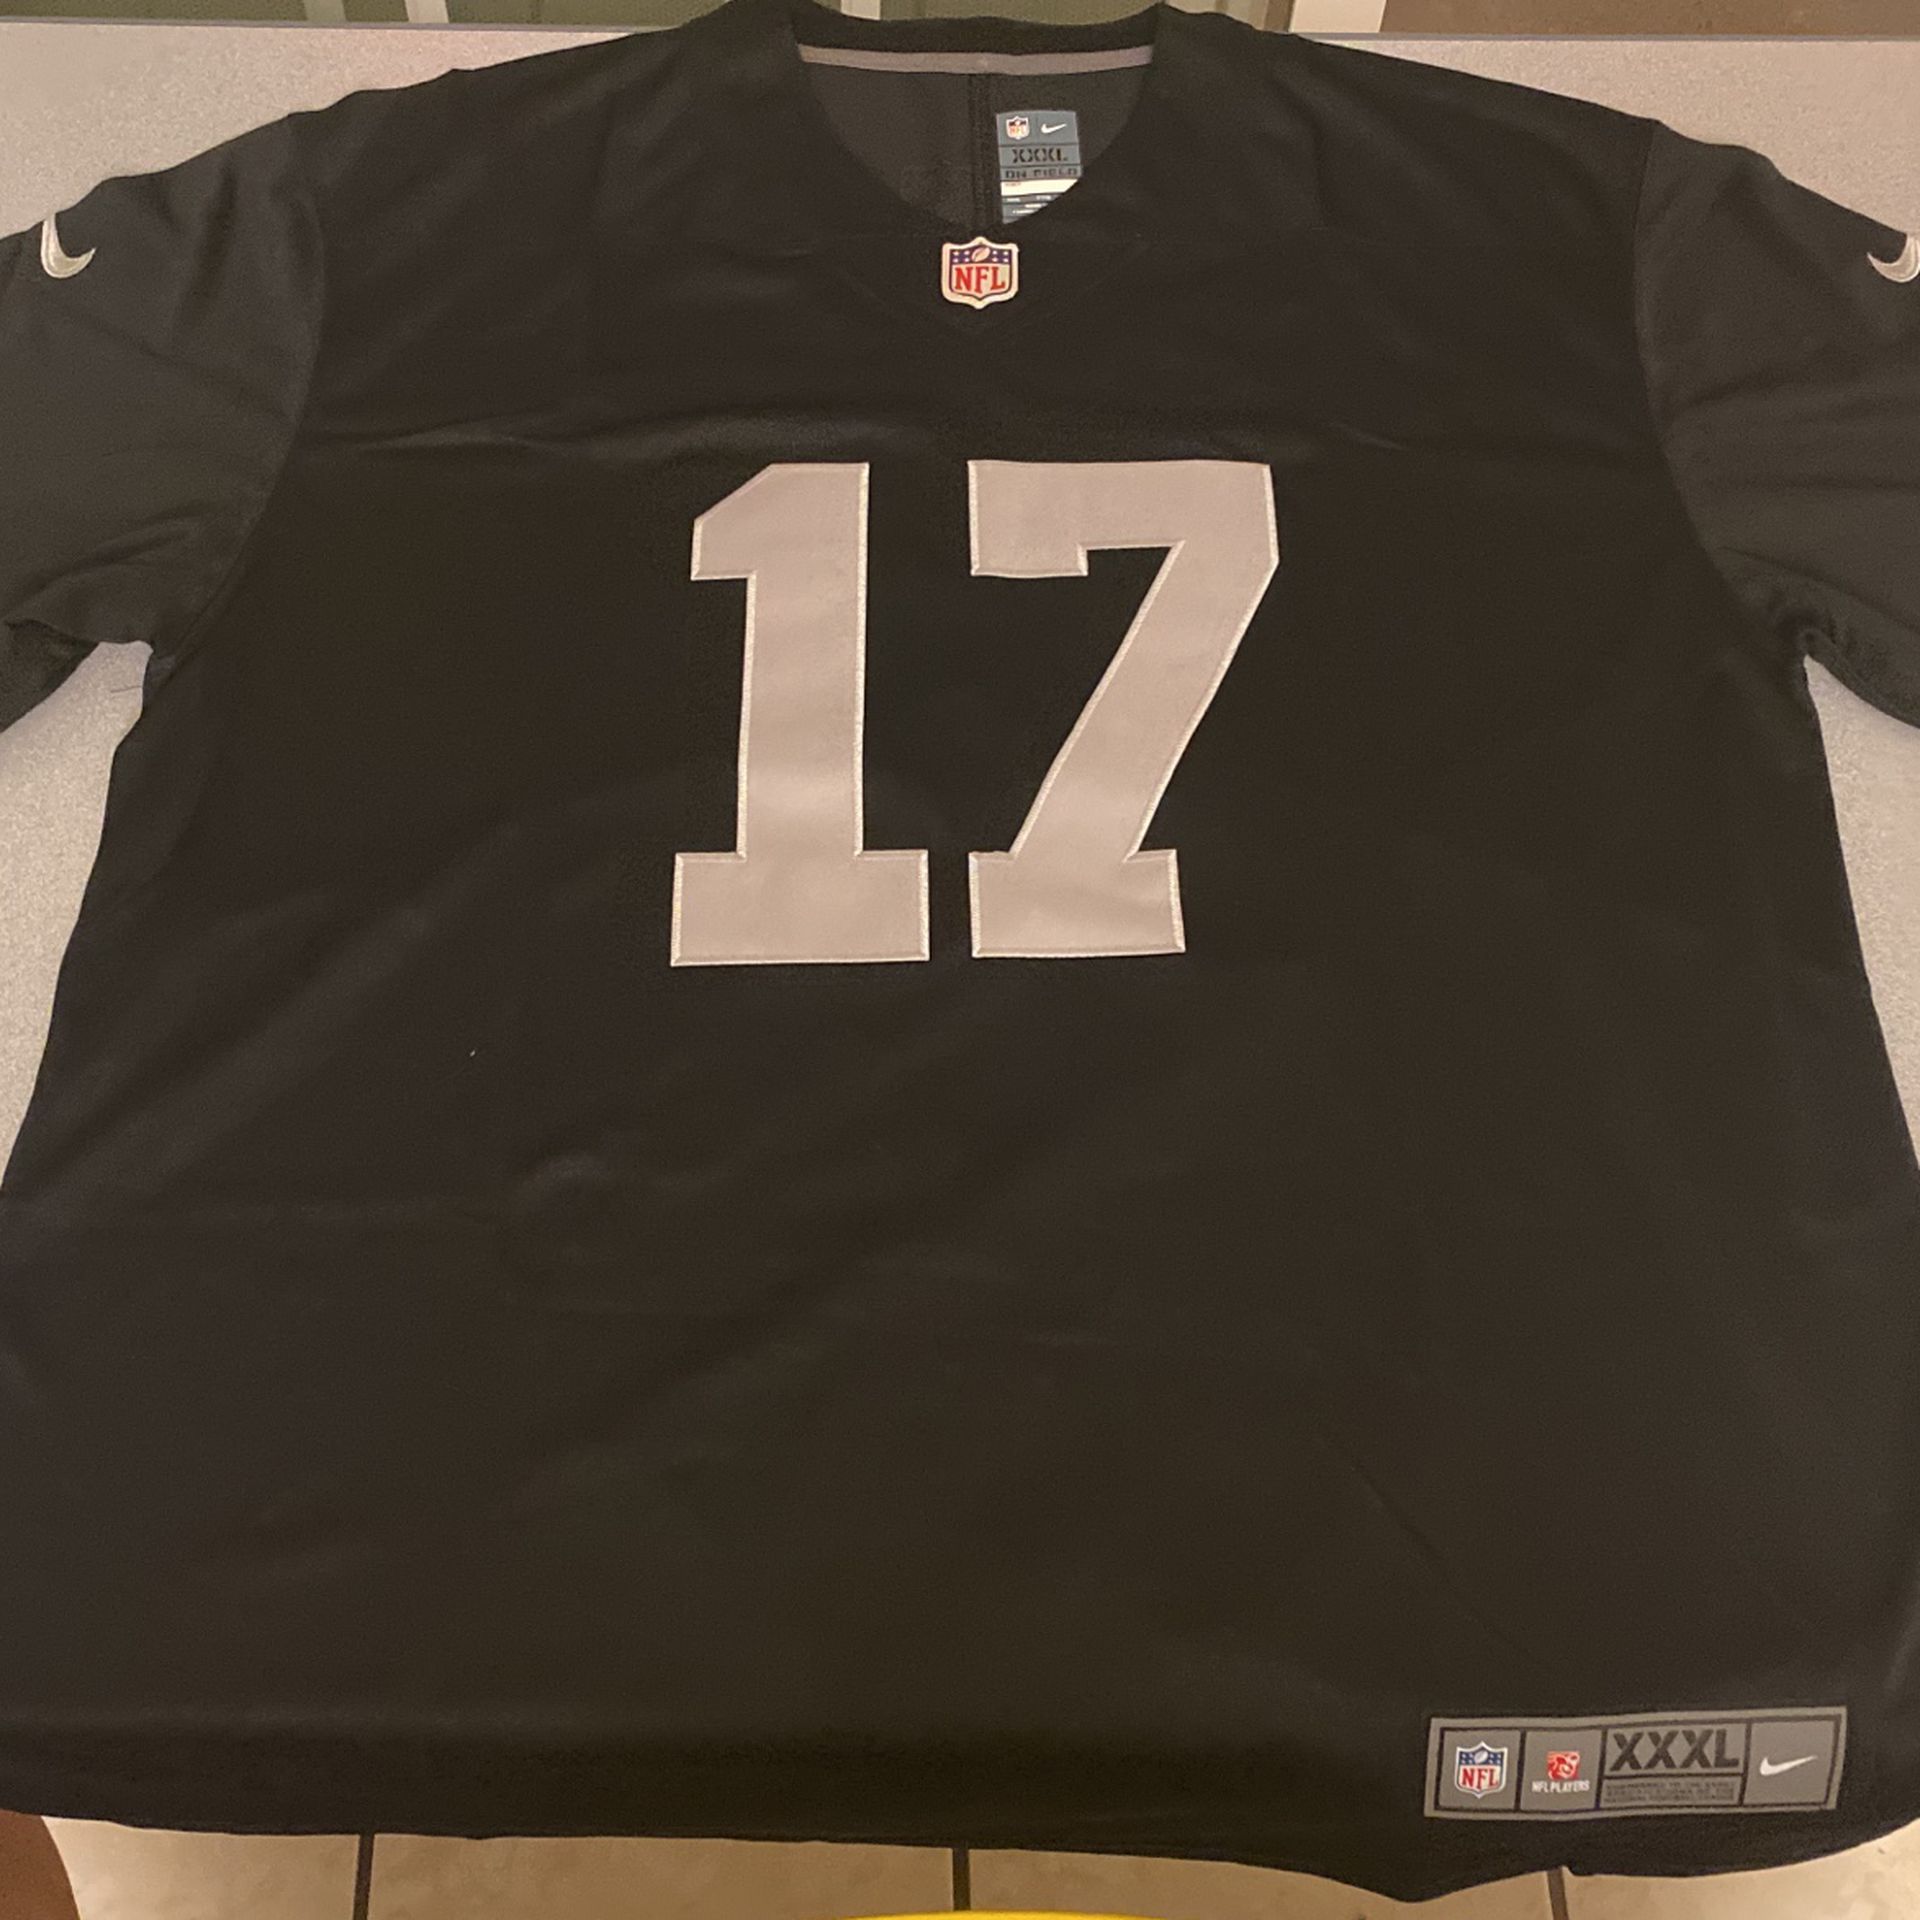 (New) Los Vegas Raiders jersey for Sale in San Diego, CA - OfferUp